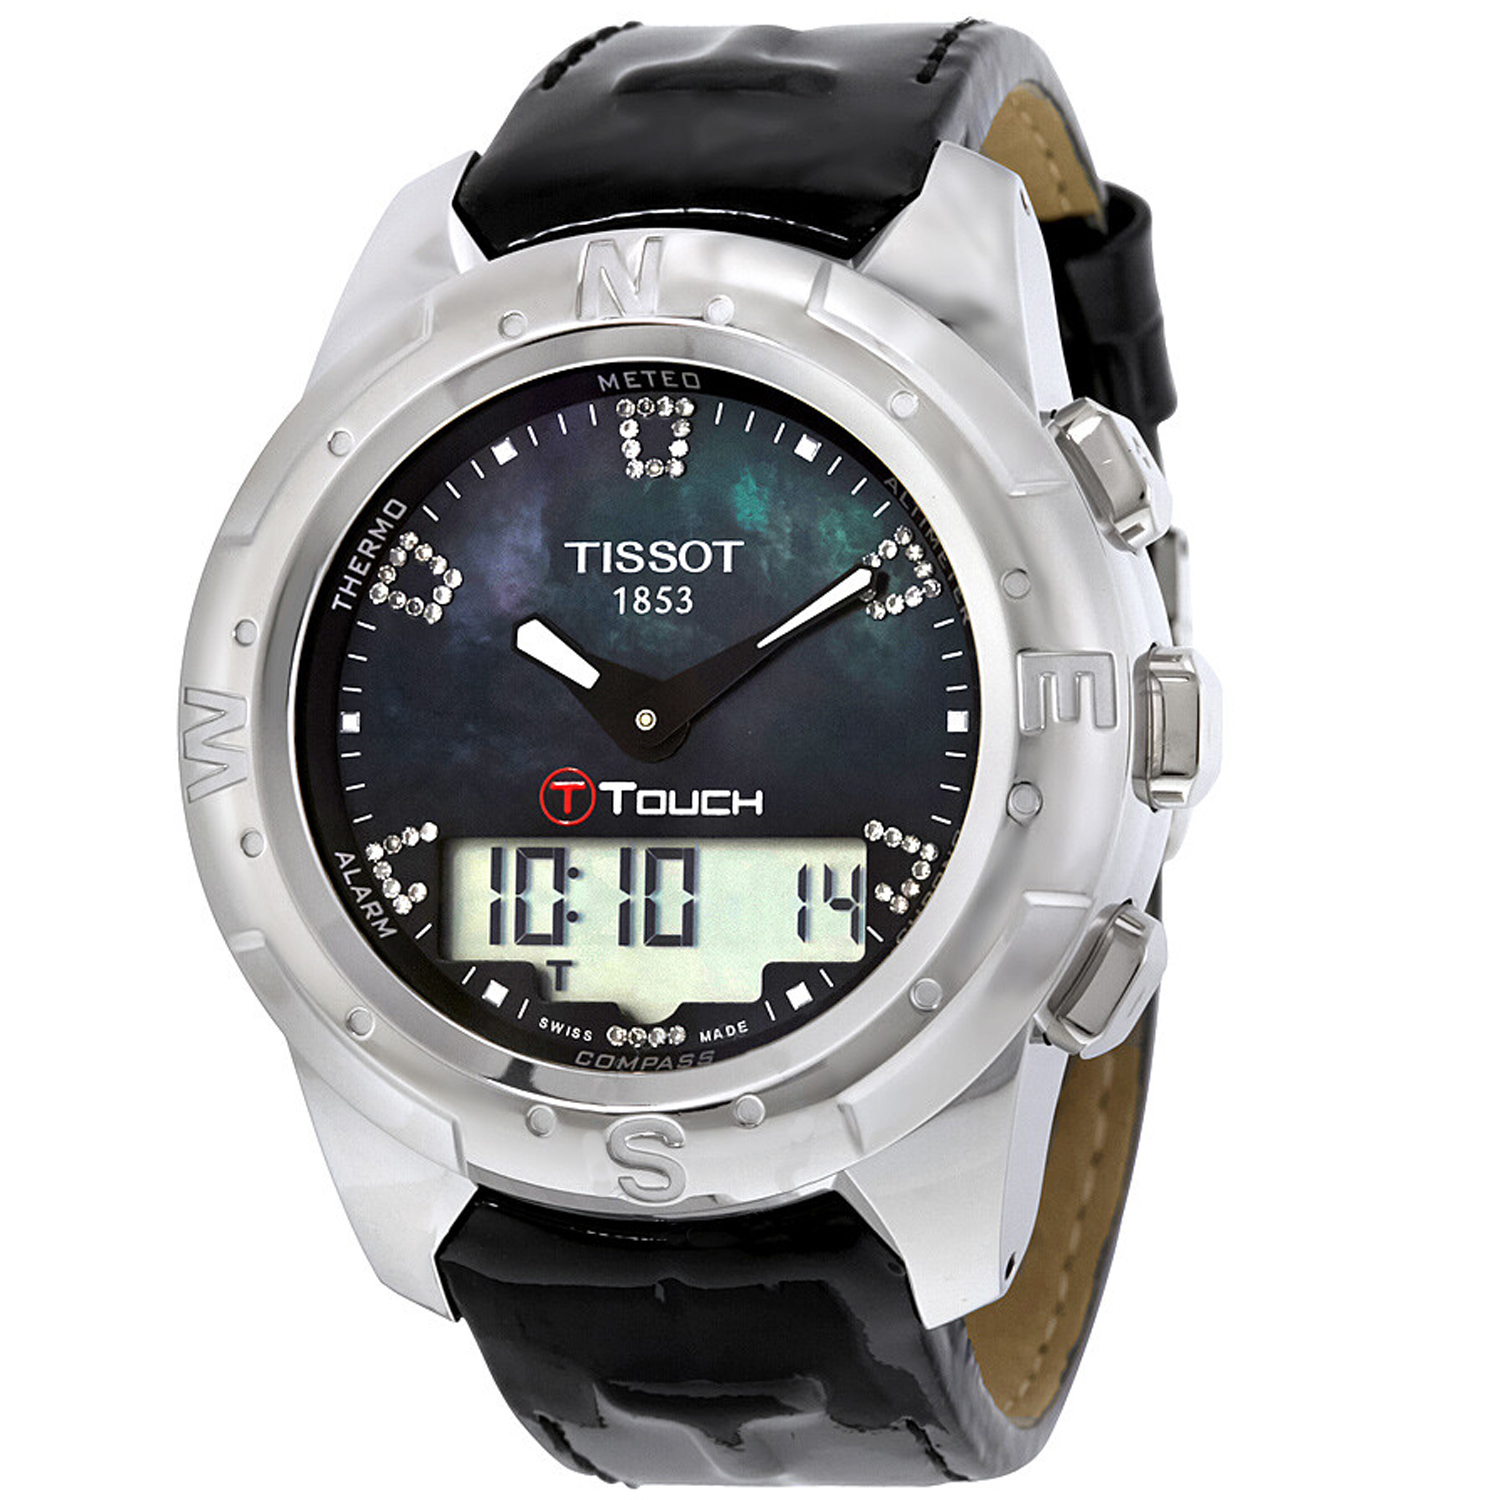 Tissot Women's T-Touch II Black mother of pearl Dial Watch - T0472204612600